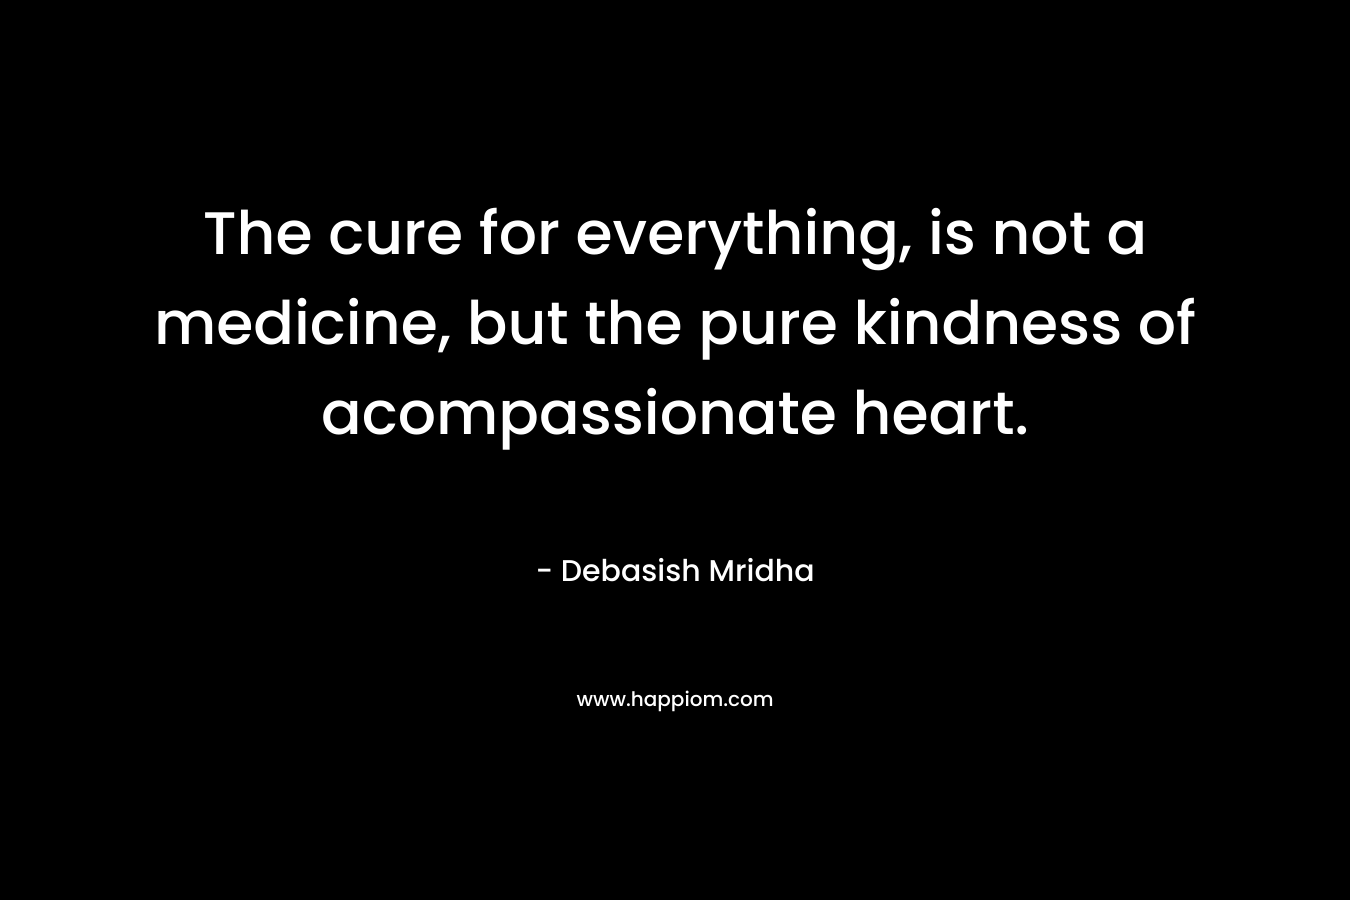 The cure for everything, is not a medicine, but the pure kindness of acompassionate heart.